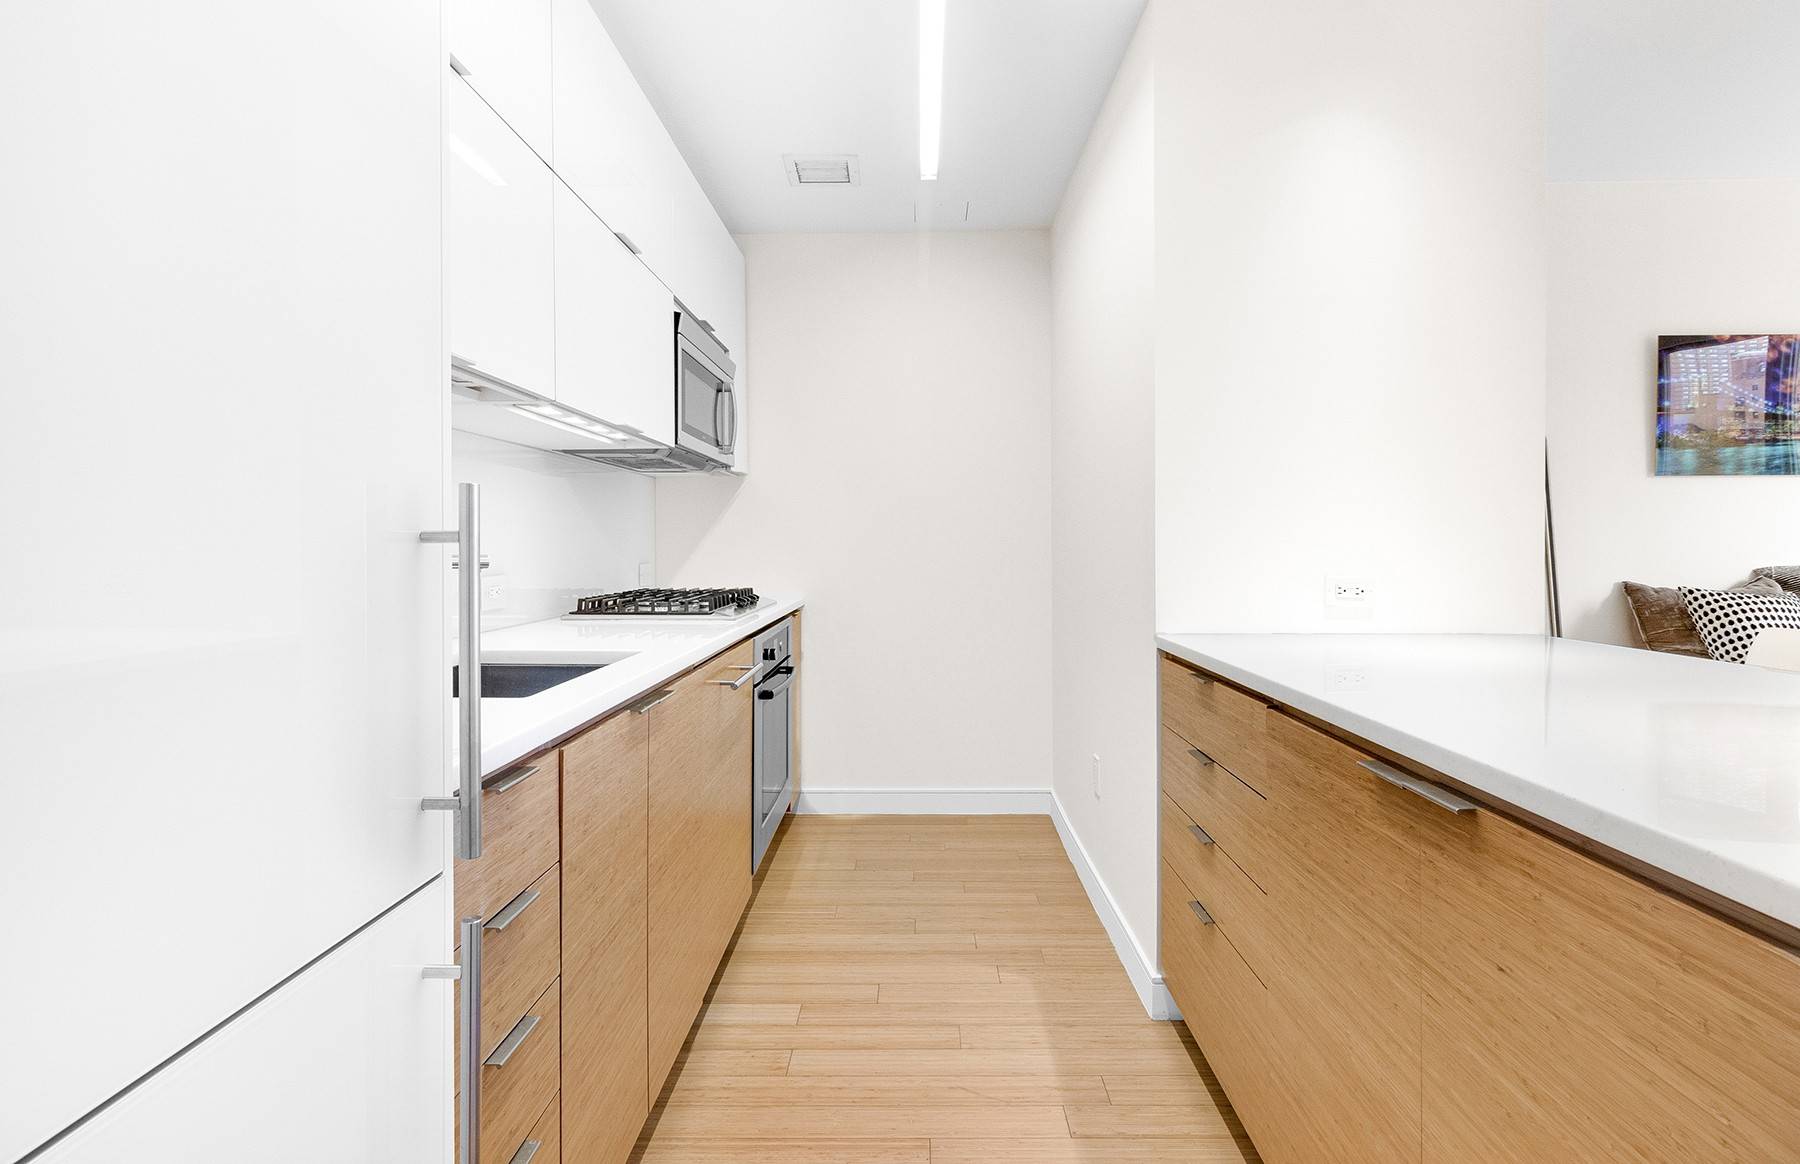 Welcome to residence 4J at 303 East 33rd Street.